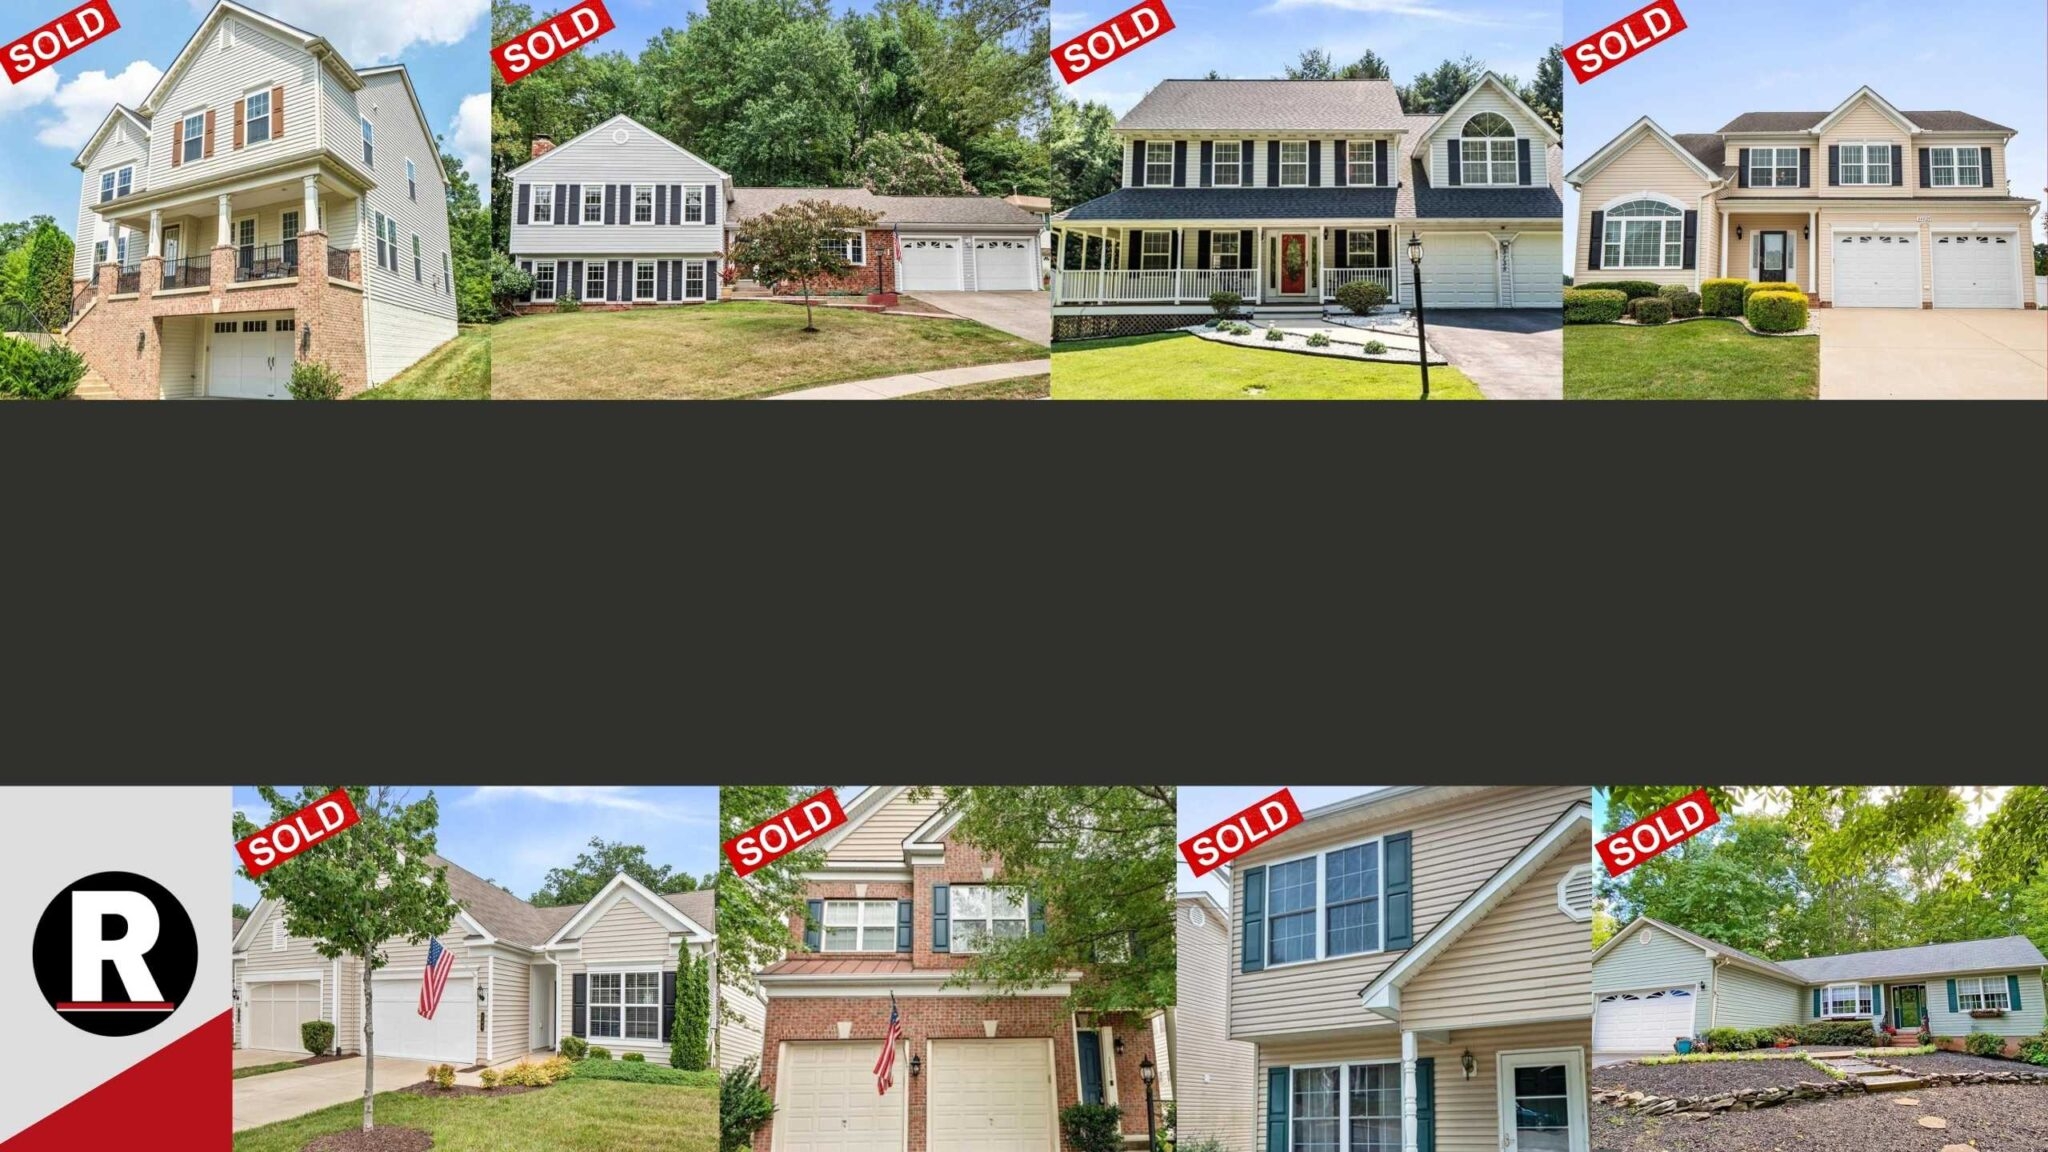 Recent Multiple Families Served! Their Homes Sold FAST & For Top-Dollar!